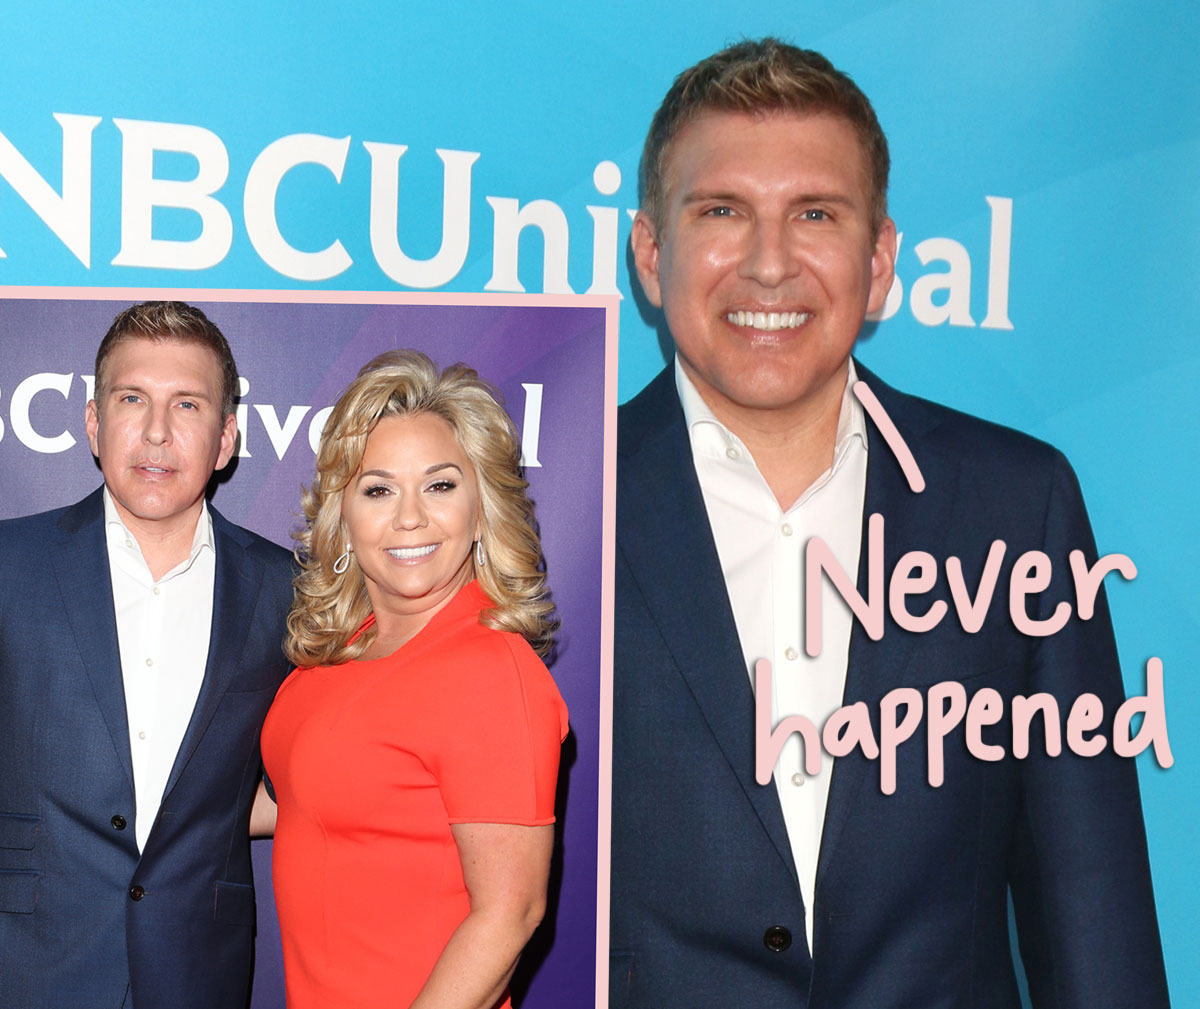 #Todd Chrisley Blasts Claims He’s Gay & Had Affair With Former Business Associate: ‘He’s A Toad’